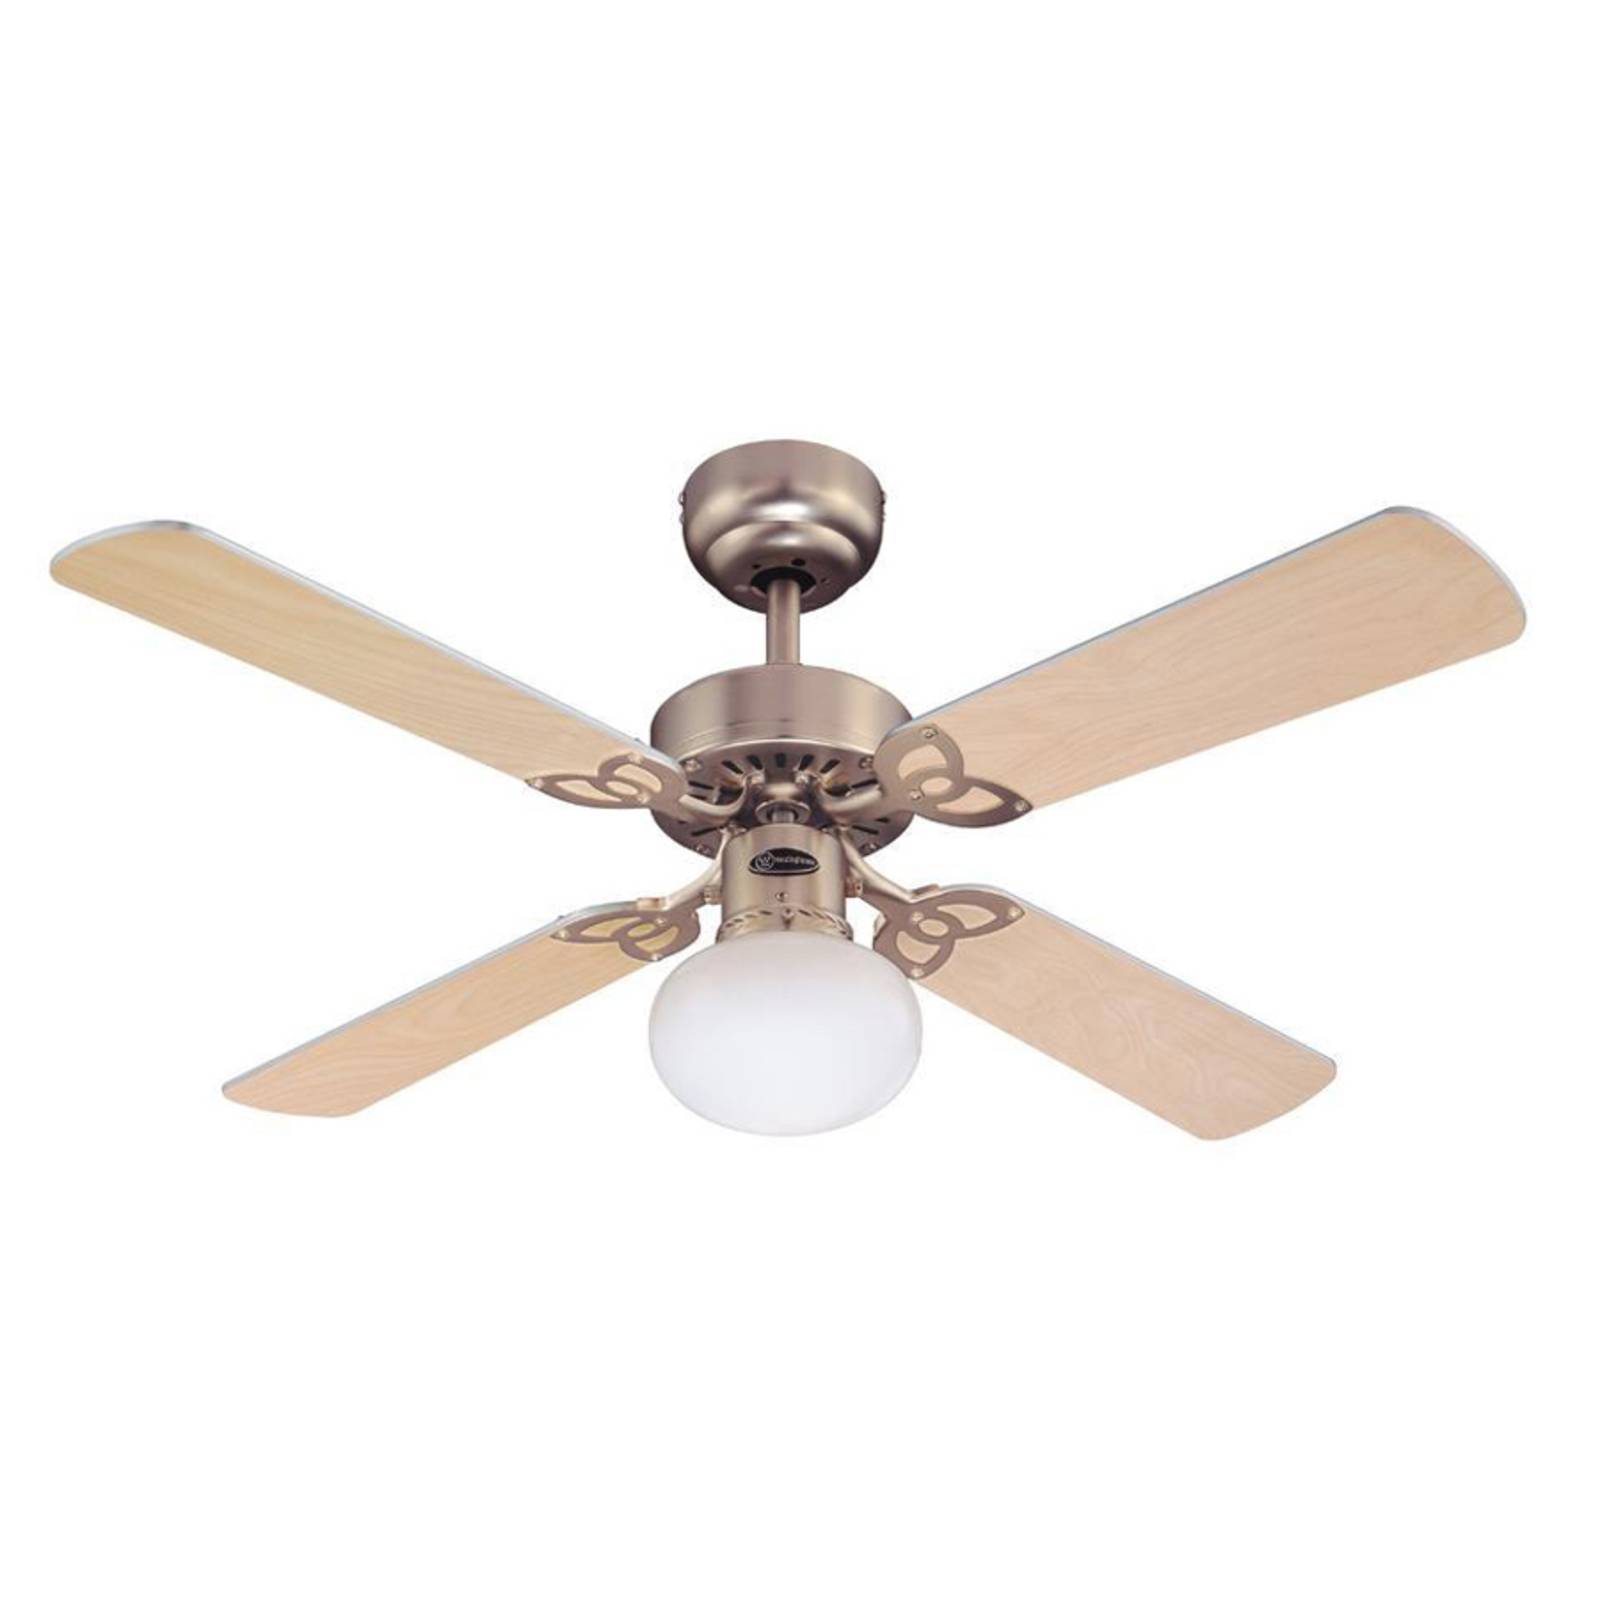 Vegas ceiling fan with light in brushed aluminium